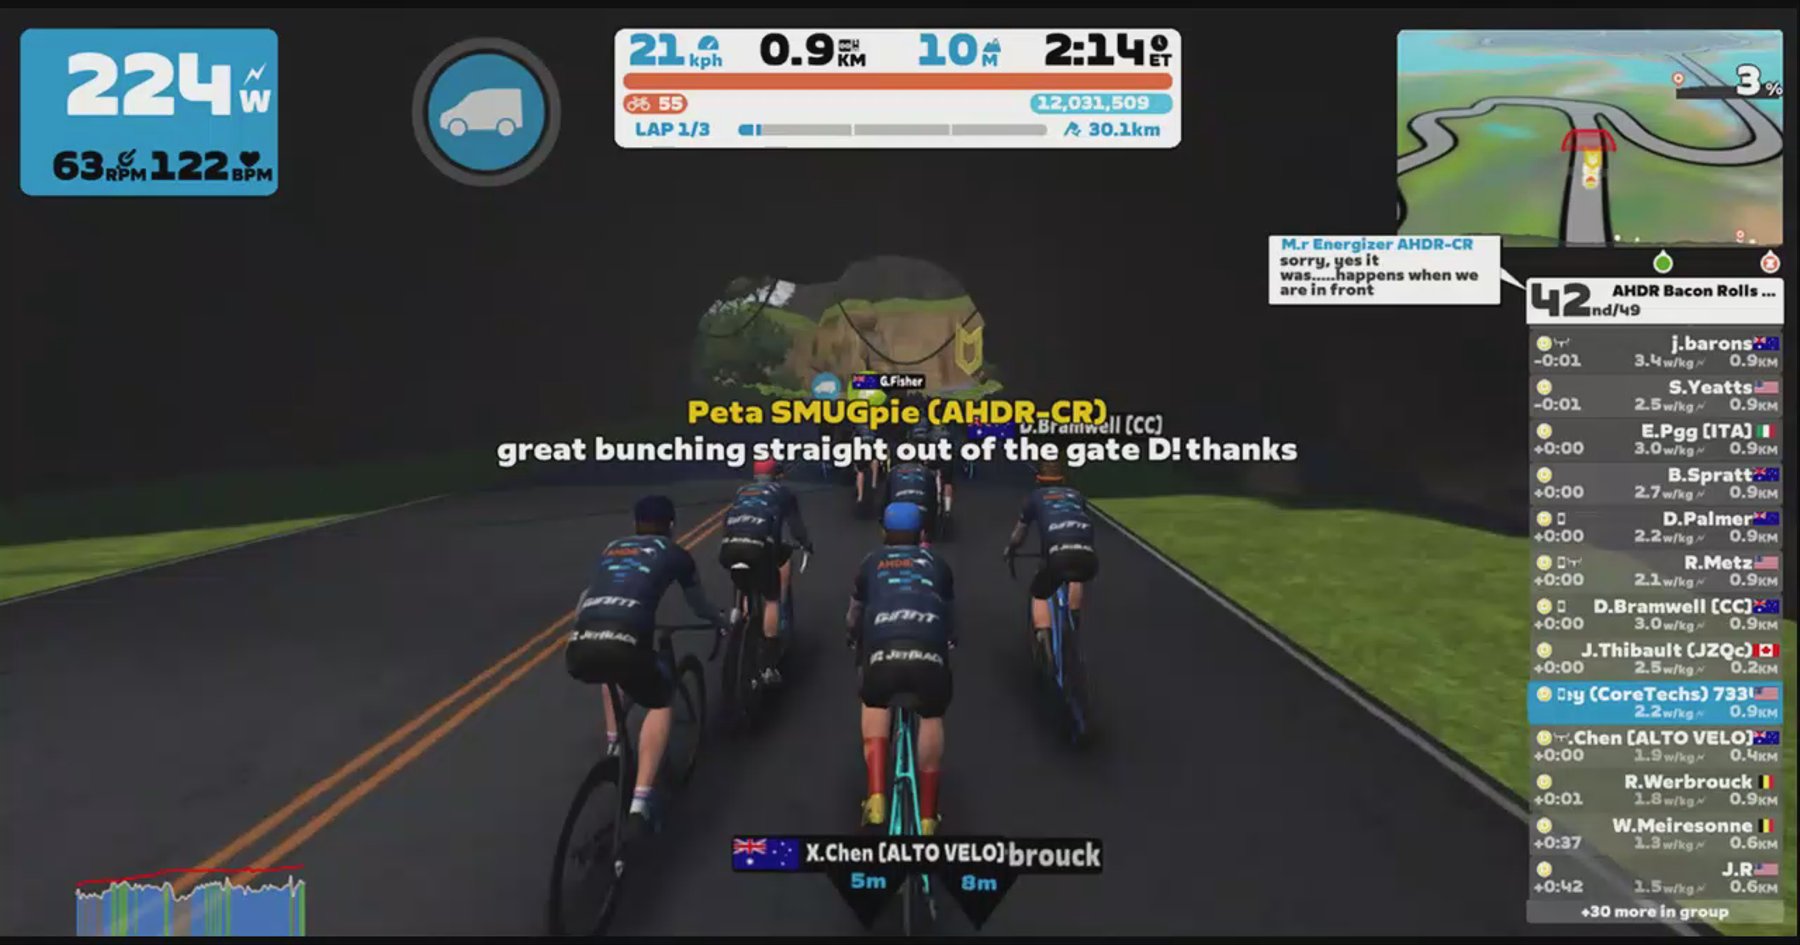 Zwift - Group Ride: AHDR Bacon Rolls with Caffeine (D) on Flat Route Reverse in Watopia